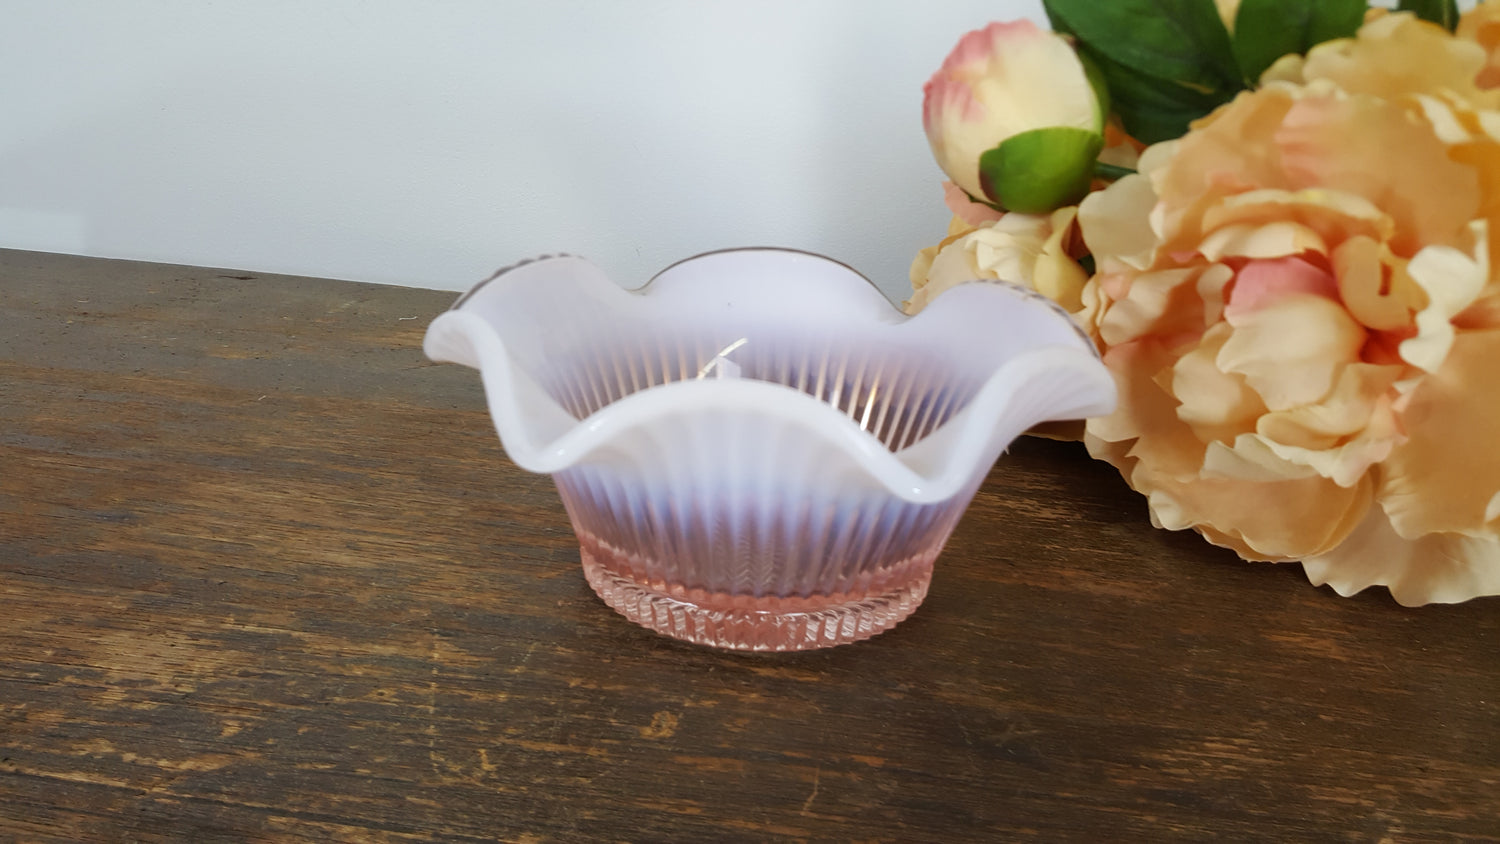 Vintage 1980s Fenton Pink And White Opalescent Ruffled Glass Candy Bowl